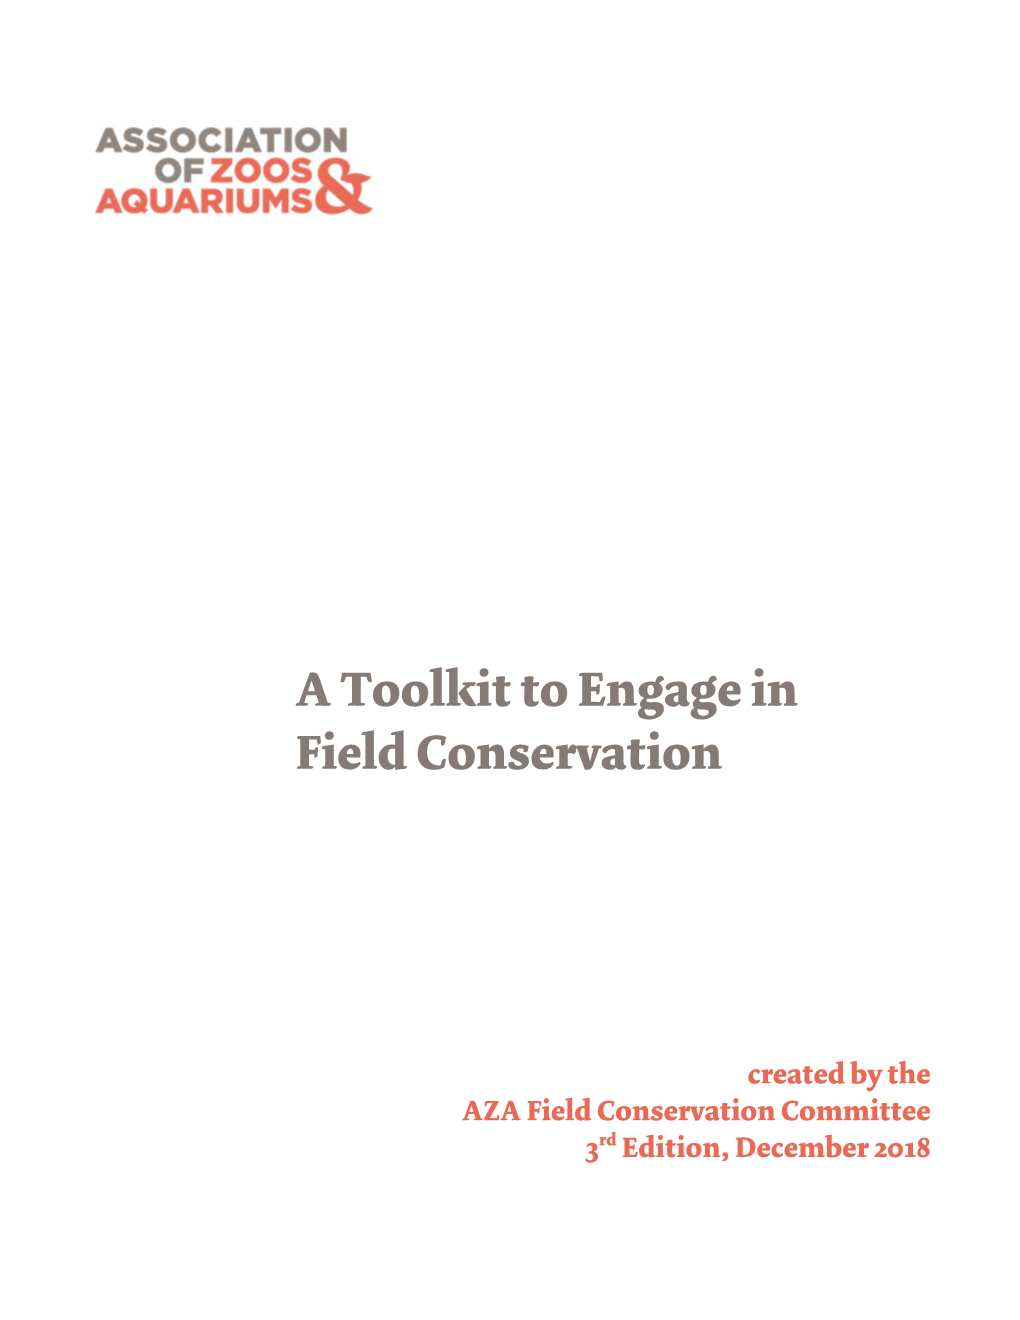 A Toolkit to Engage in Field Conservation